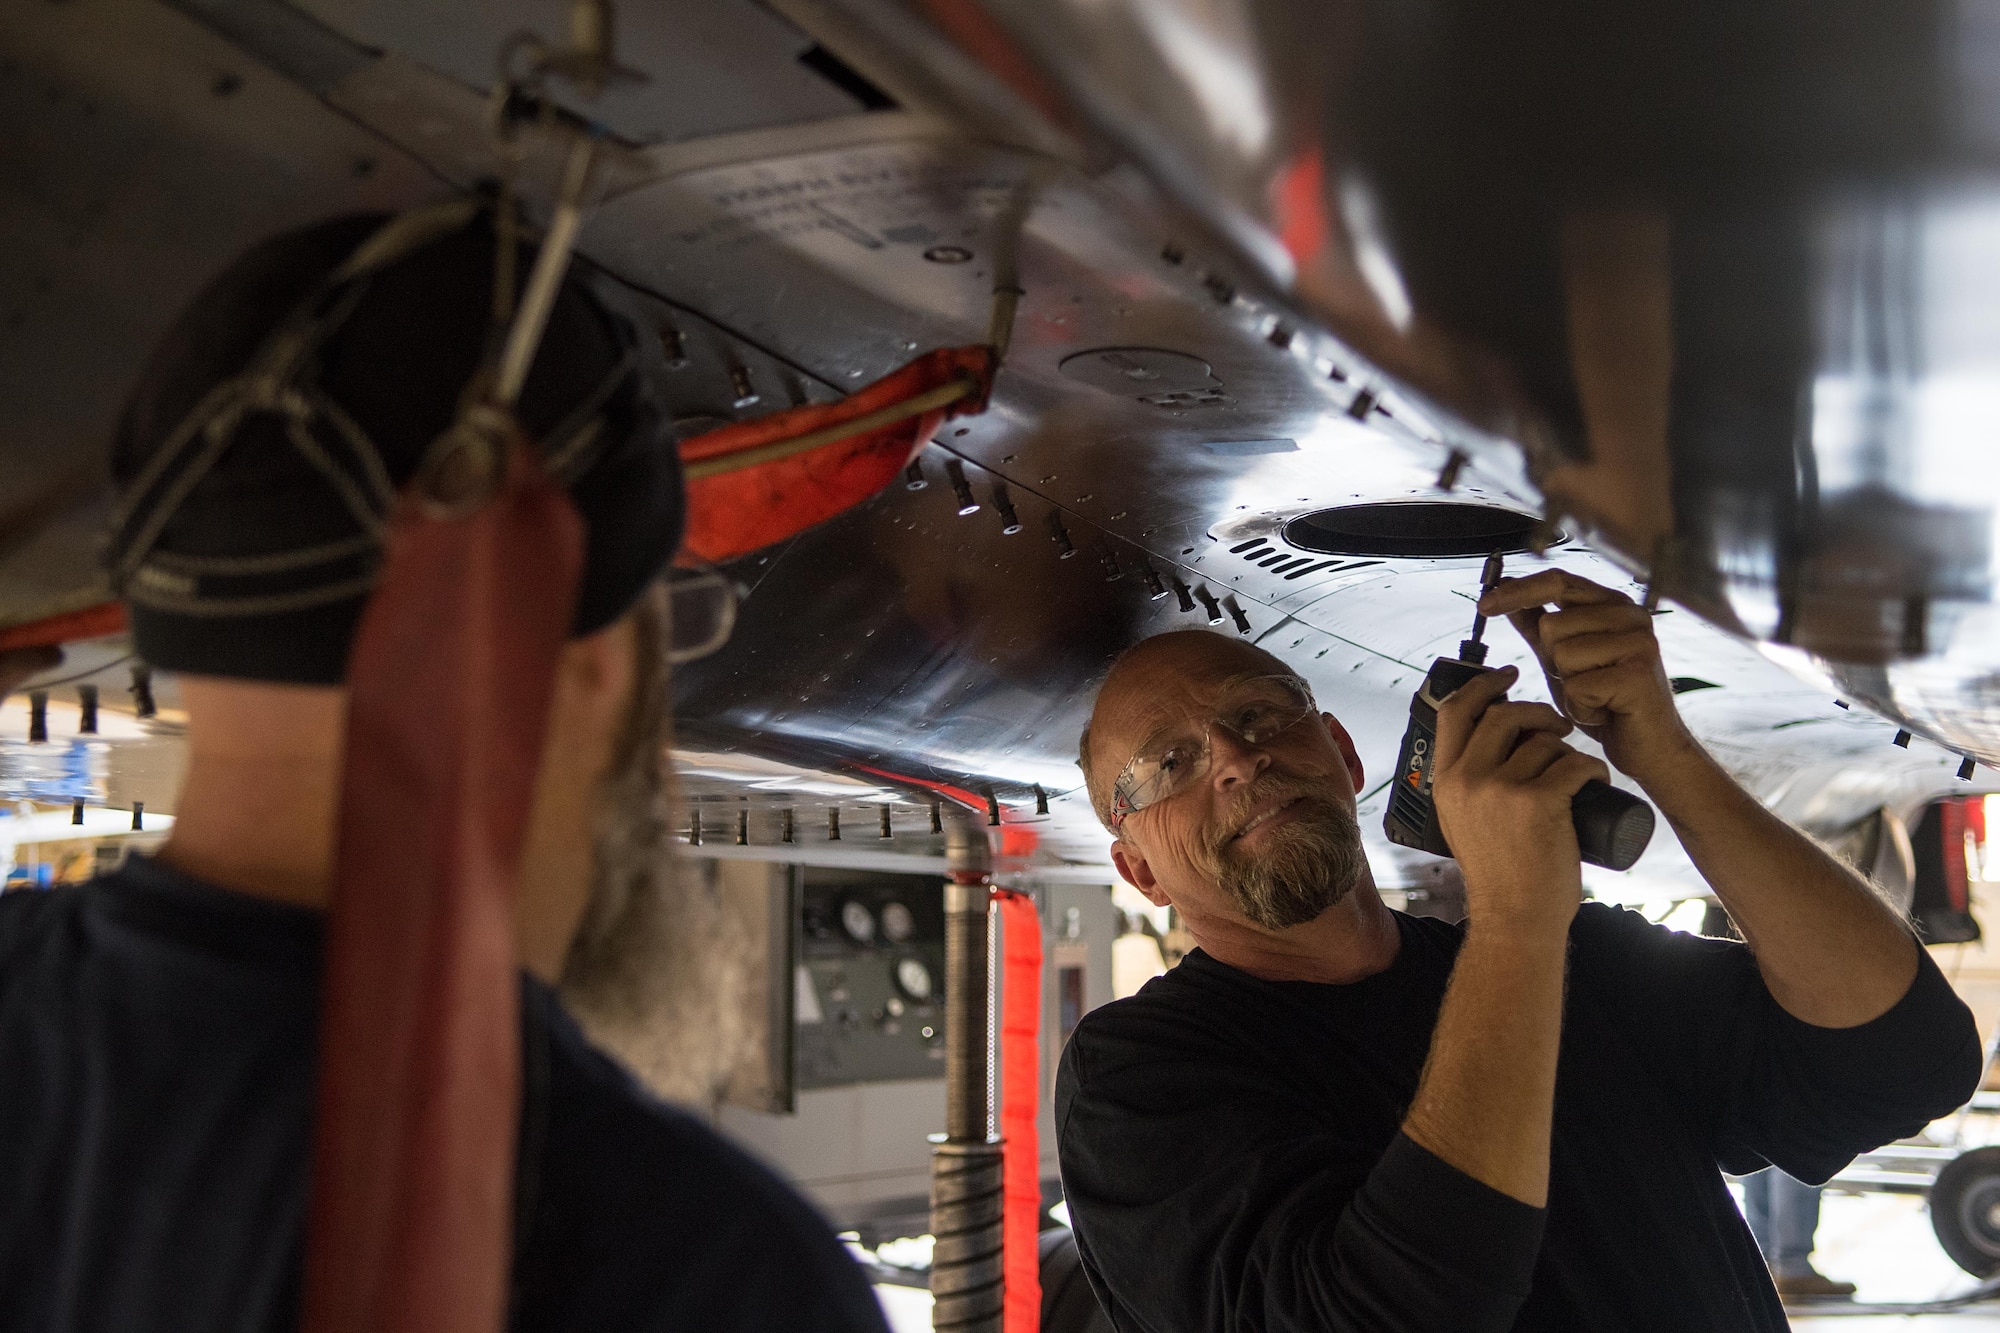 Charles Loy (right), Boeing Co. aircraft mechanic, begins to remove a panel off an F-15E Strike Eagle, Nov. 1, 2016, at Seymour Johnson Air Force Base, North Carolina. The F-15E is receiving a Radar Modernization program; it’s first major upgrade of its radar system in more than 20 years. (U.S. Air Force photo by Airman Shawna L. Keyes)